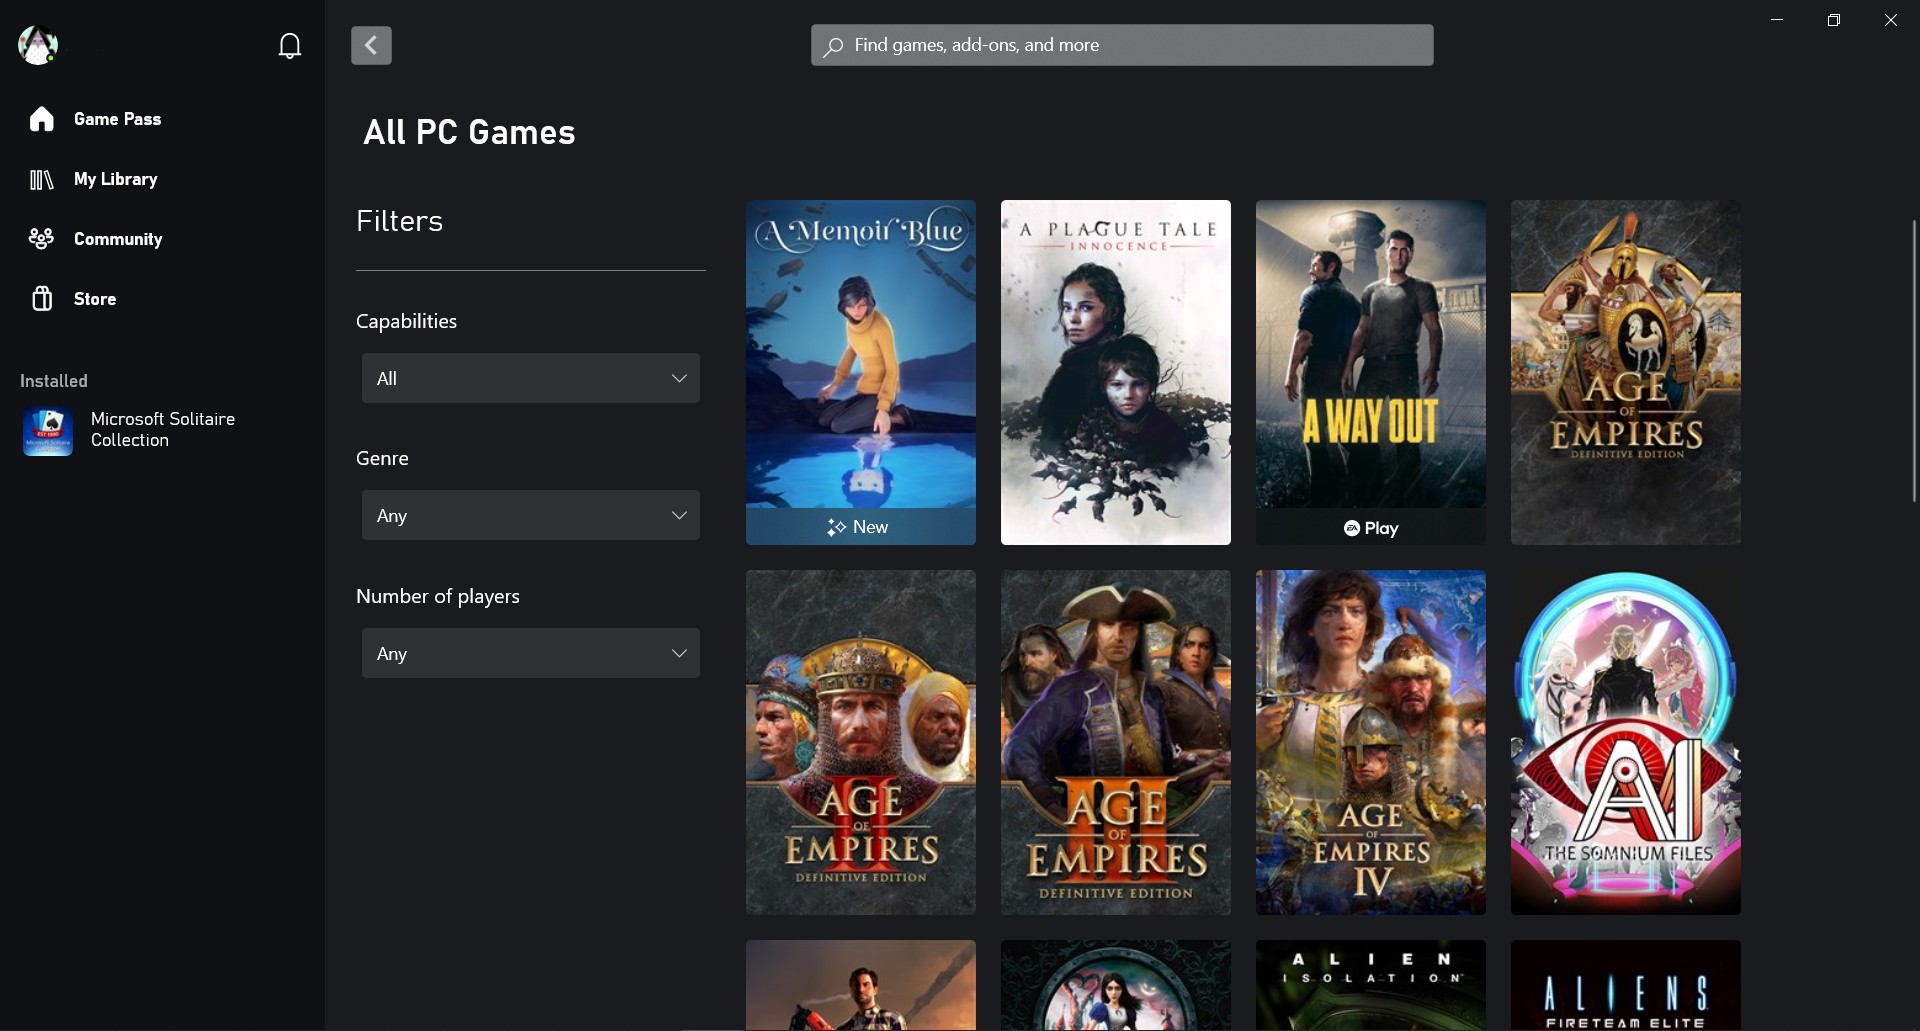 How to subscribe to Microsoft's PC Game Pass in the Philippines –